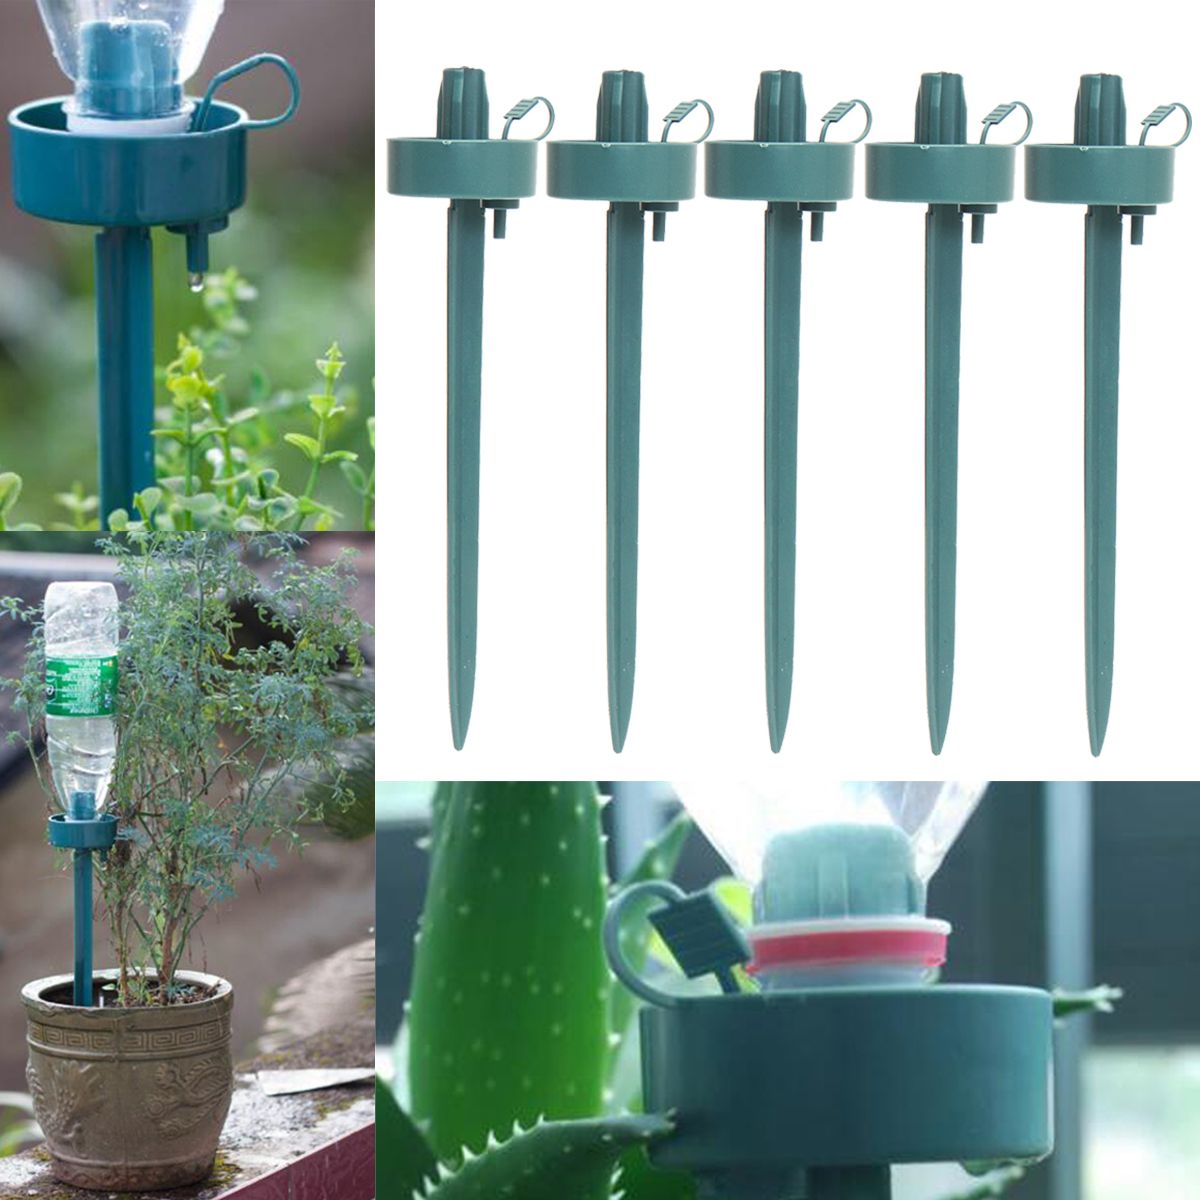 5Pcs-Automatic-Adjustable-Flow-Rate-Drip-Watering-Spike-Device-for-Garden-Plant-Irrigation-1237878